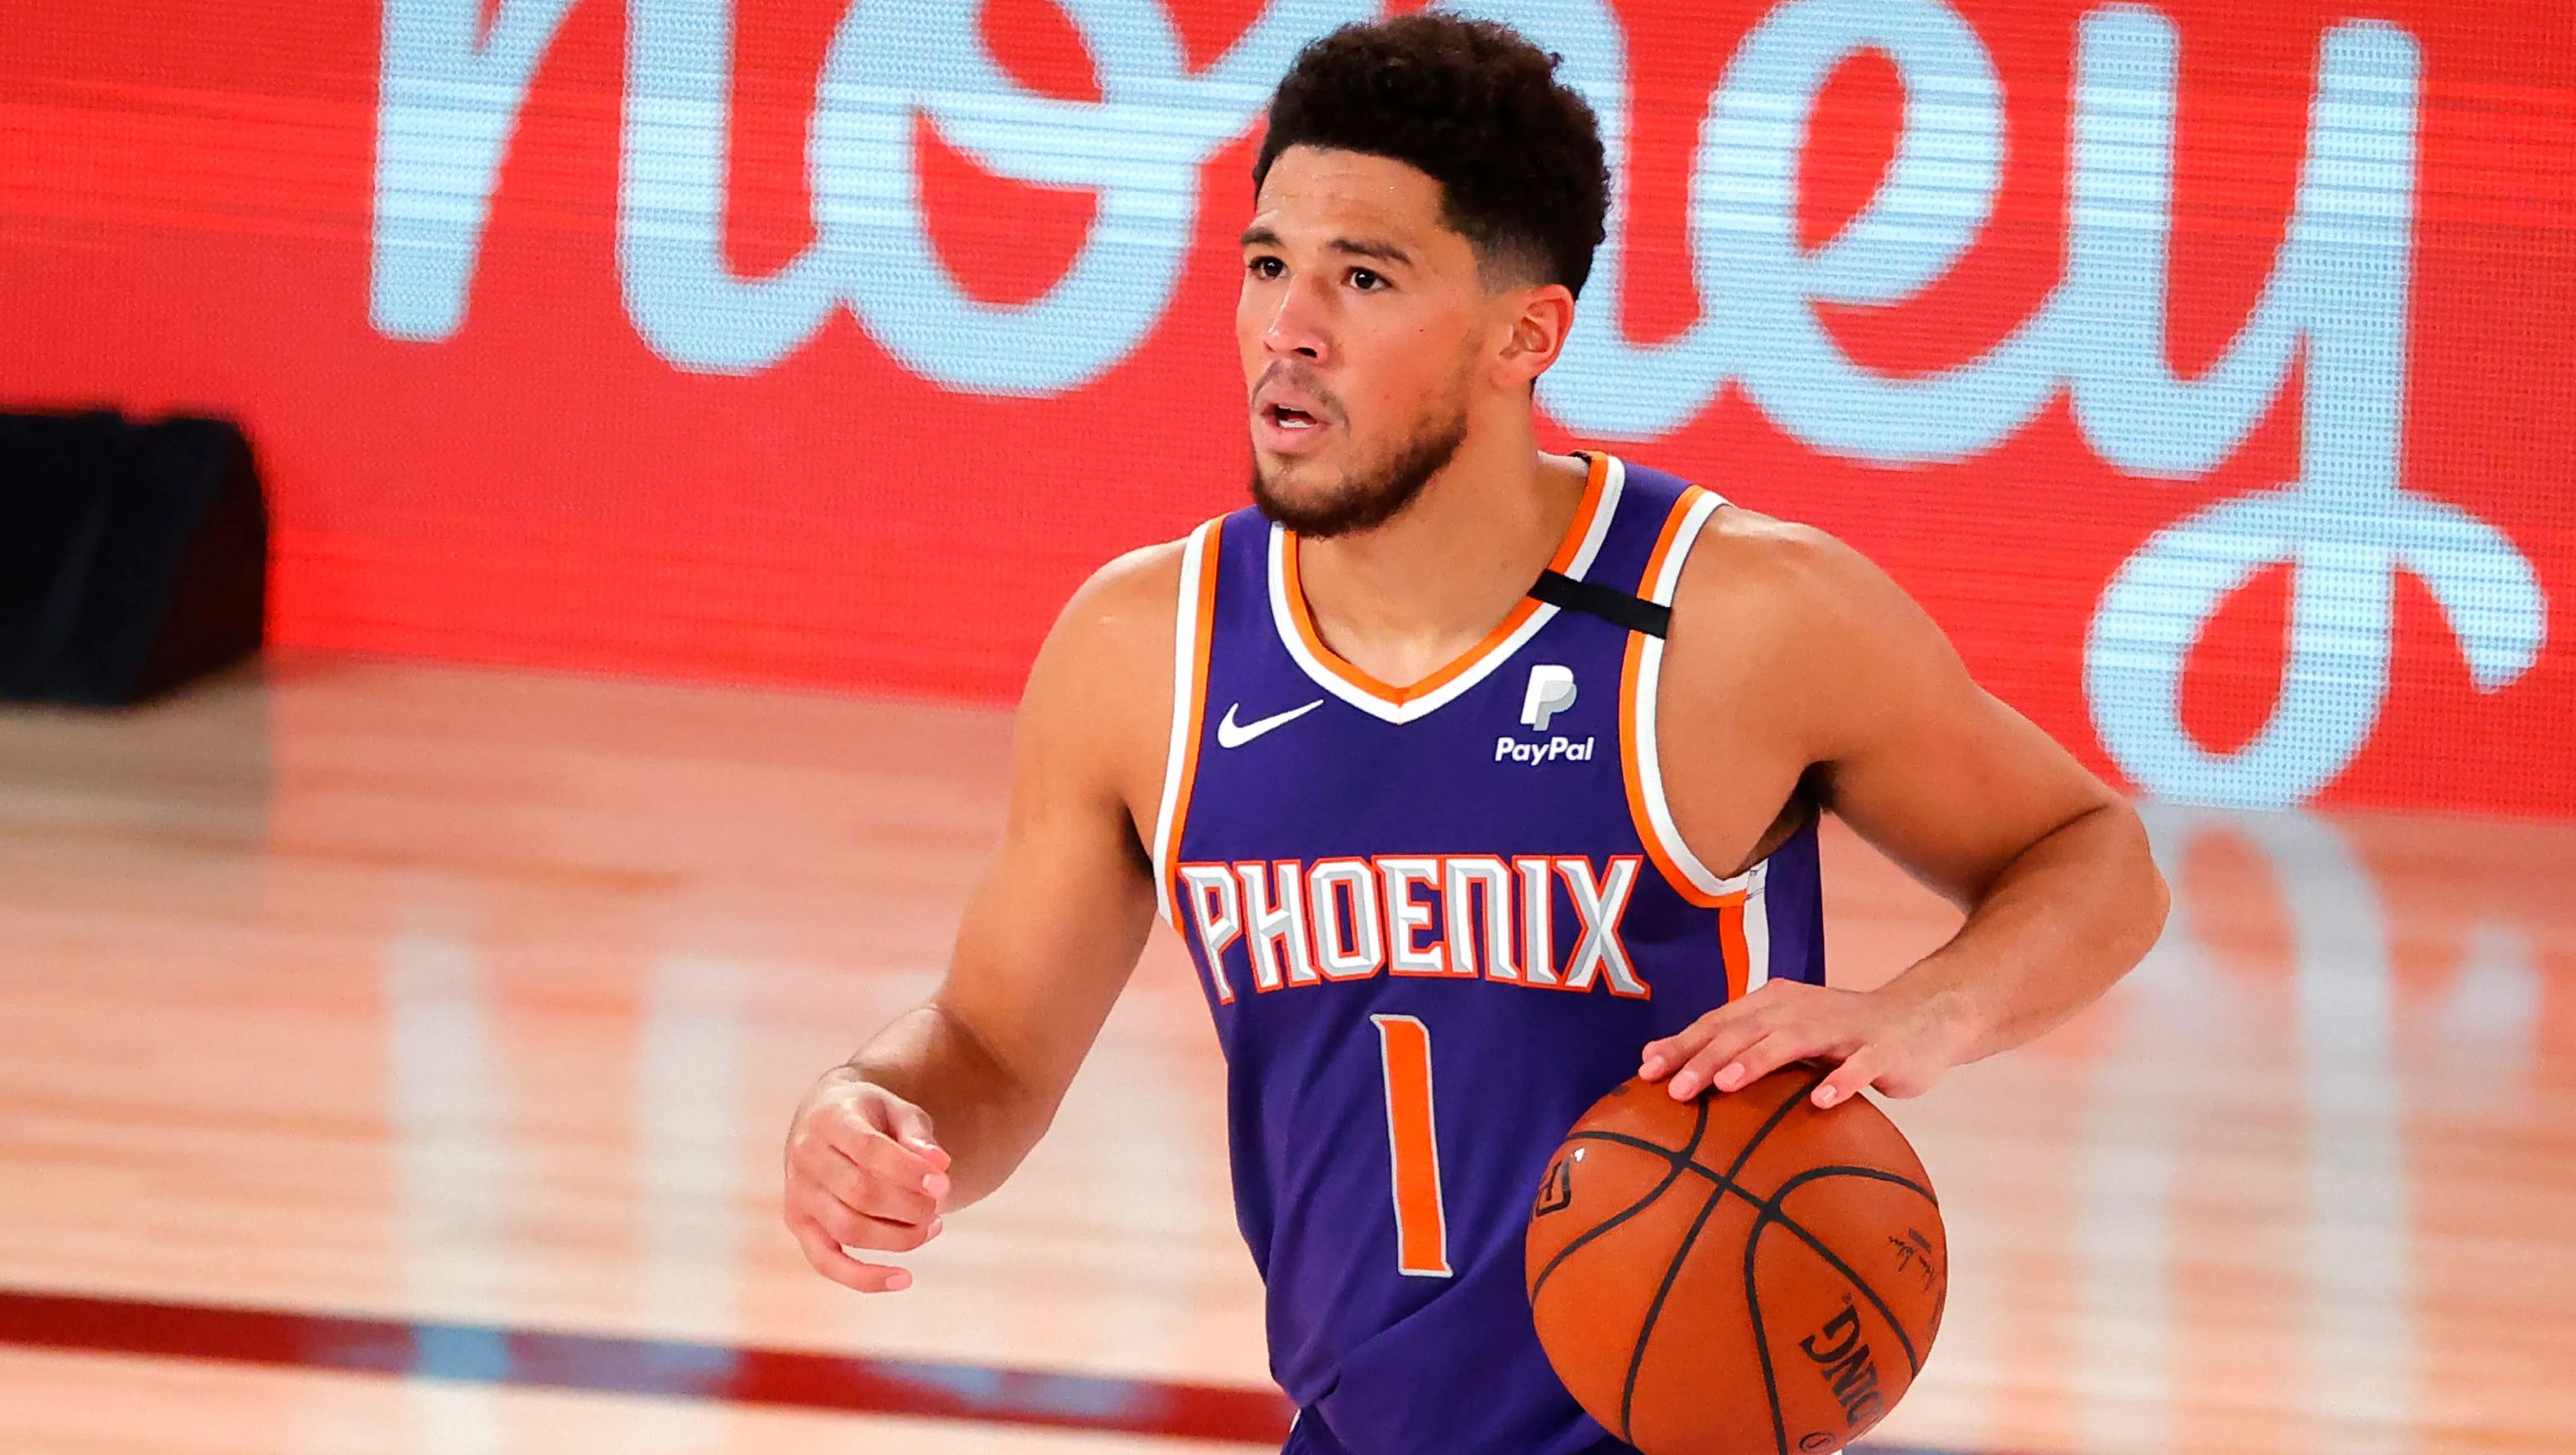 Devin Booker making plays for the Suns